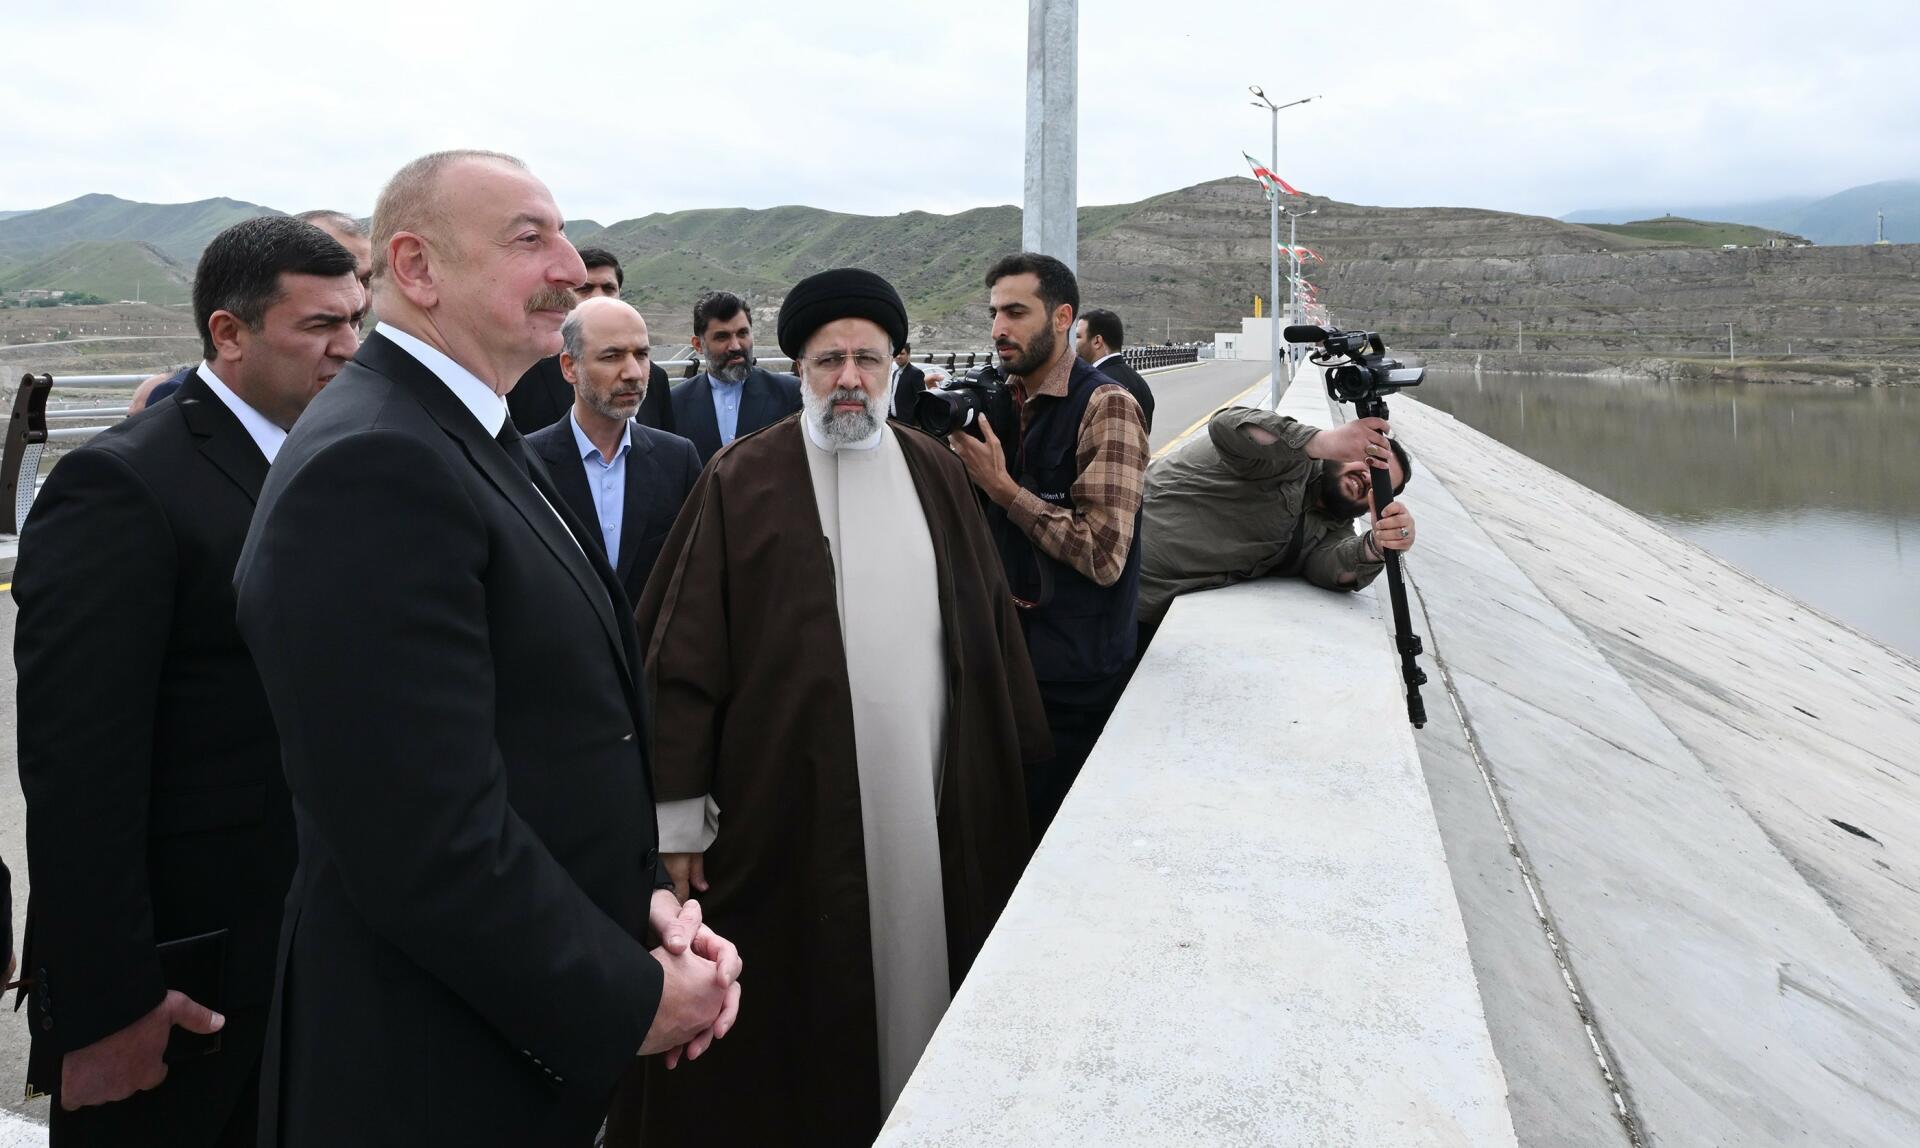 Opening at the border: Ilham Aliyev and Raisi attend